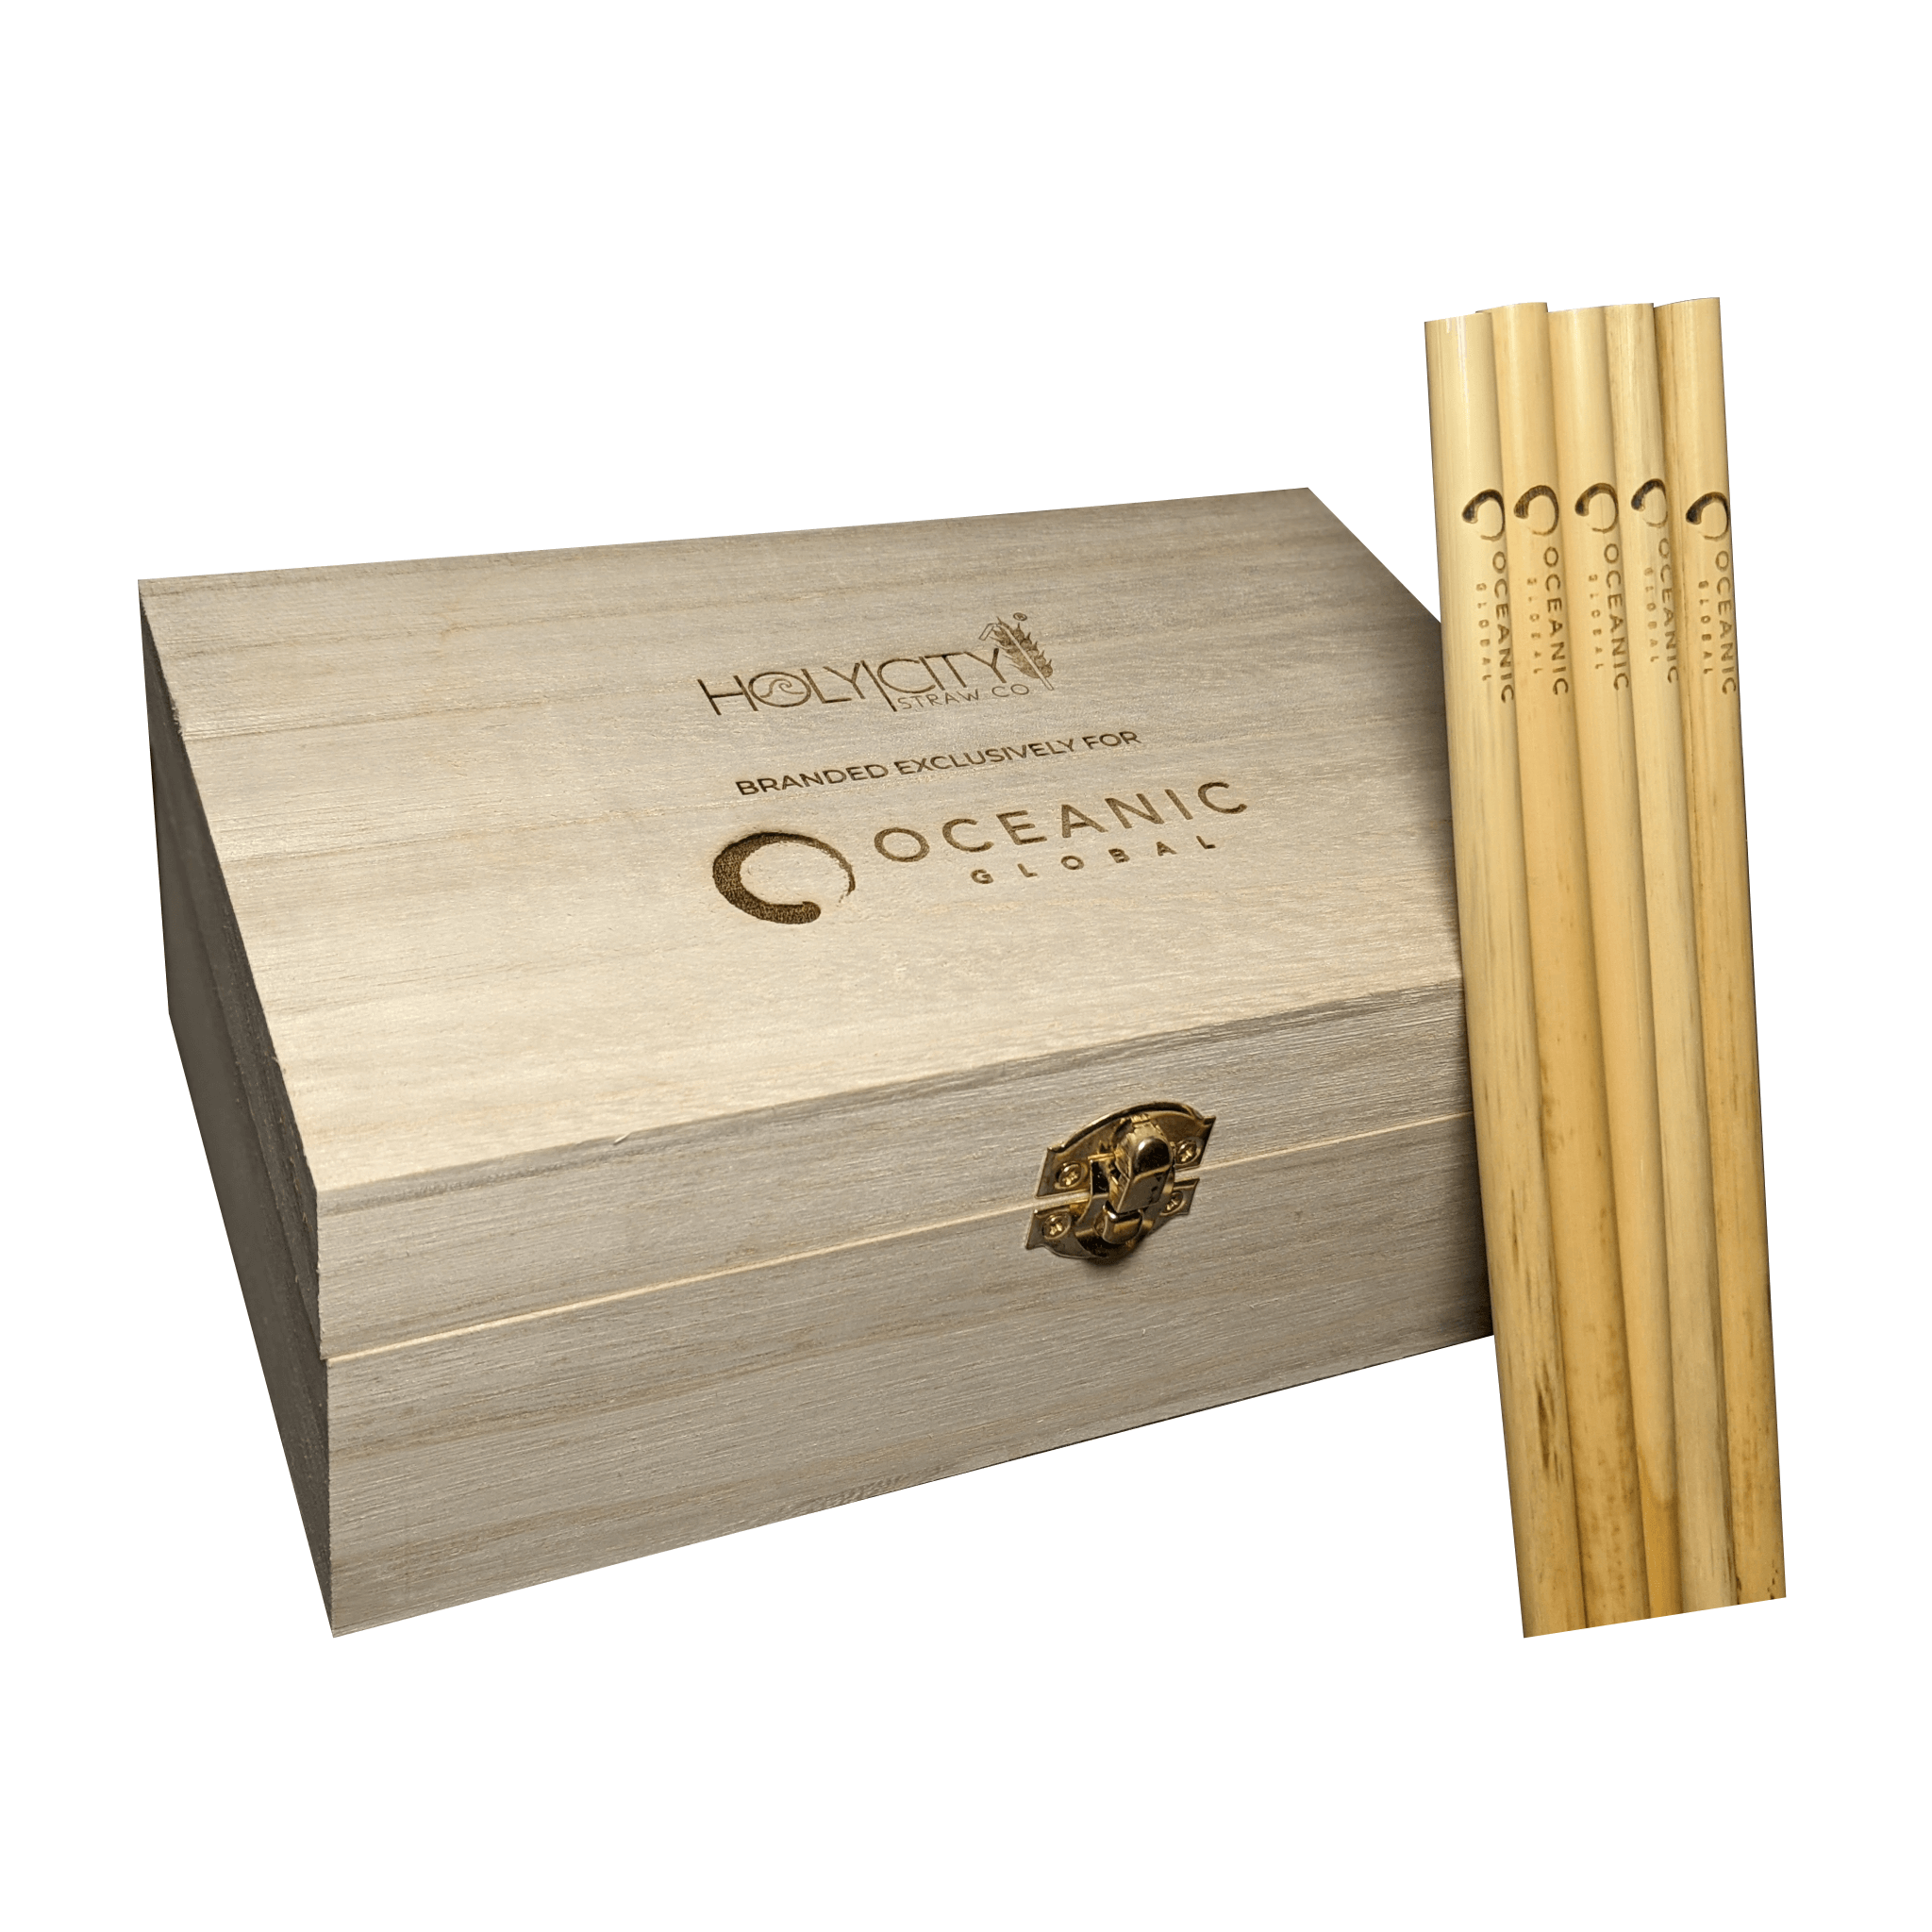 Custom Branded Straw Holder Box Closed Top with Five Laser Engraved straws